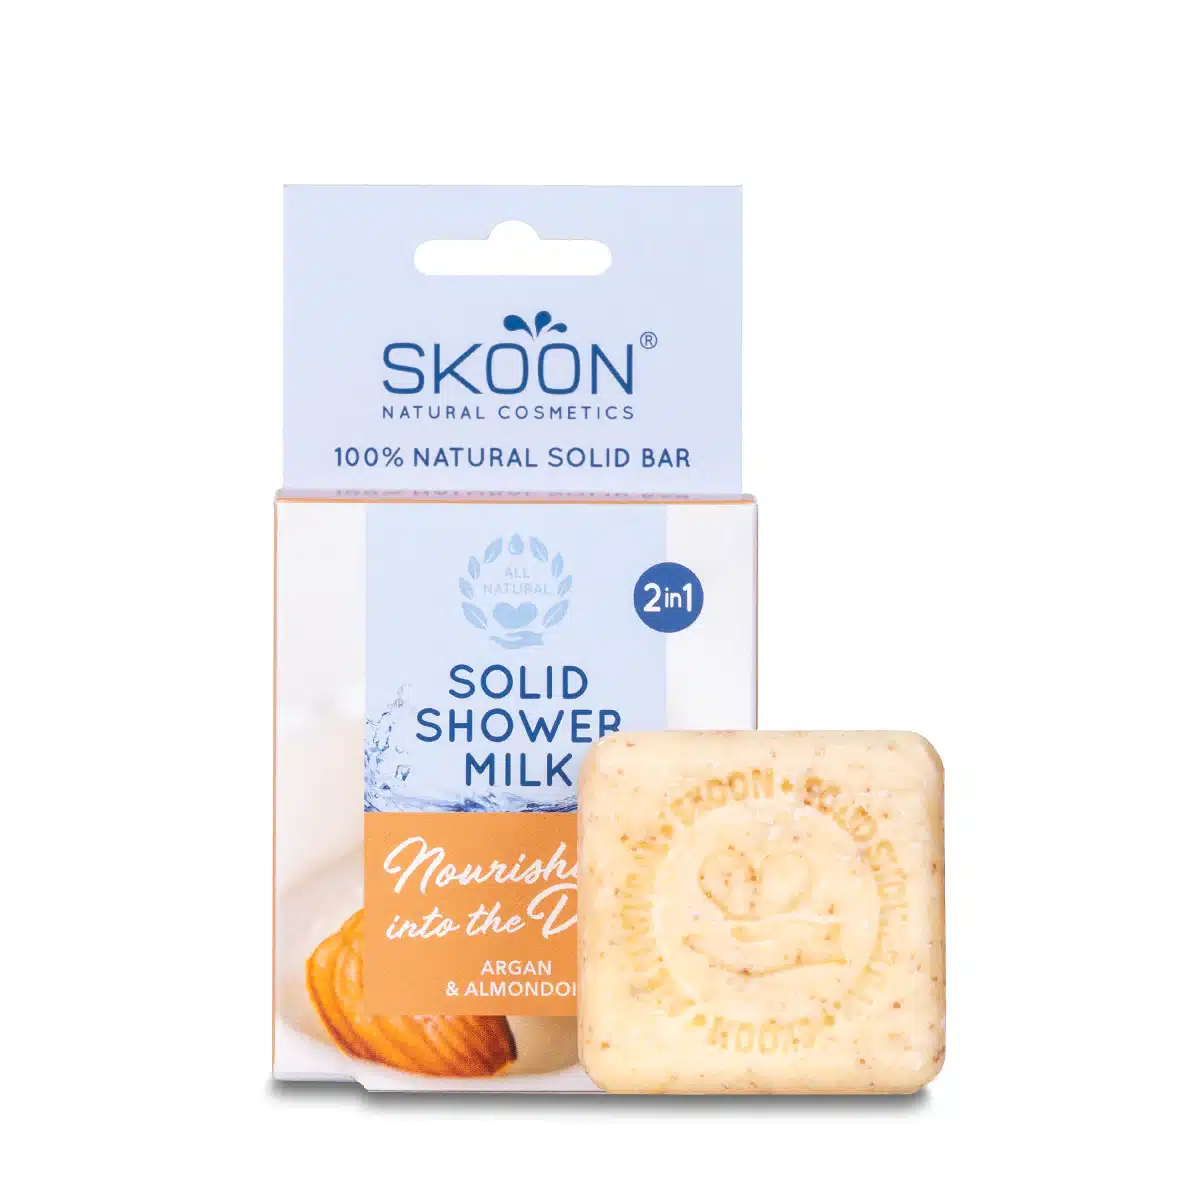 Skoon_front_SS_NitD_boxsoap_5815_02HR_1200x